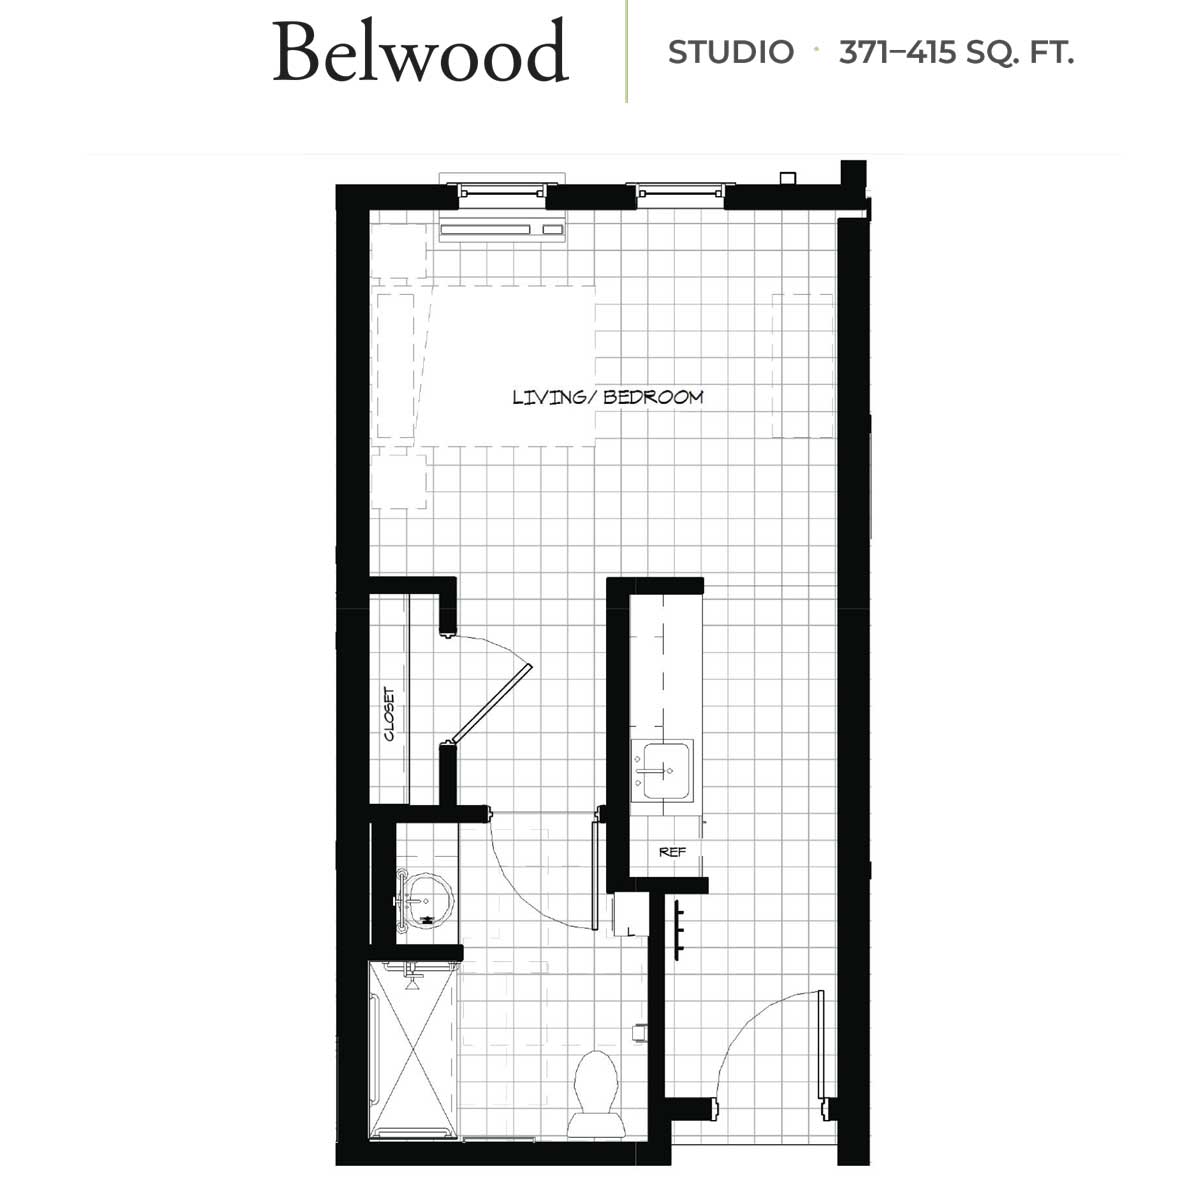 Belwood Studio apartment floor plan showing layout with living area, kitchen, bathroom, and closet.